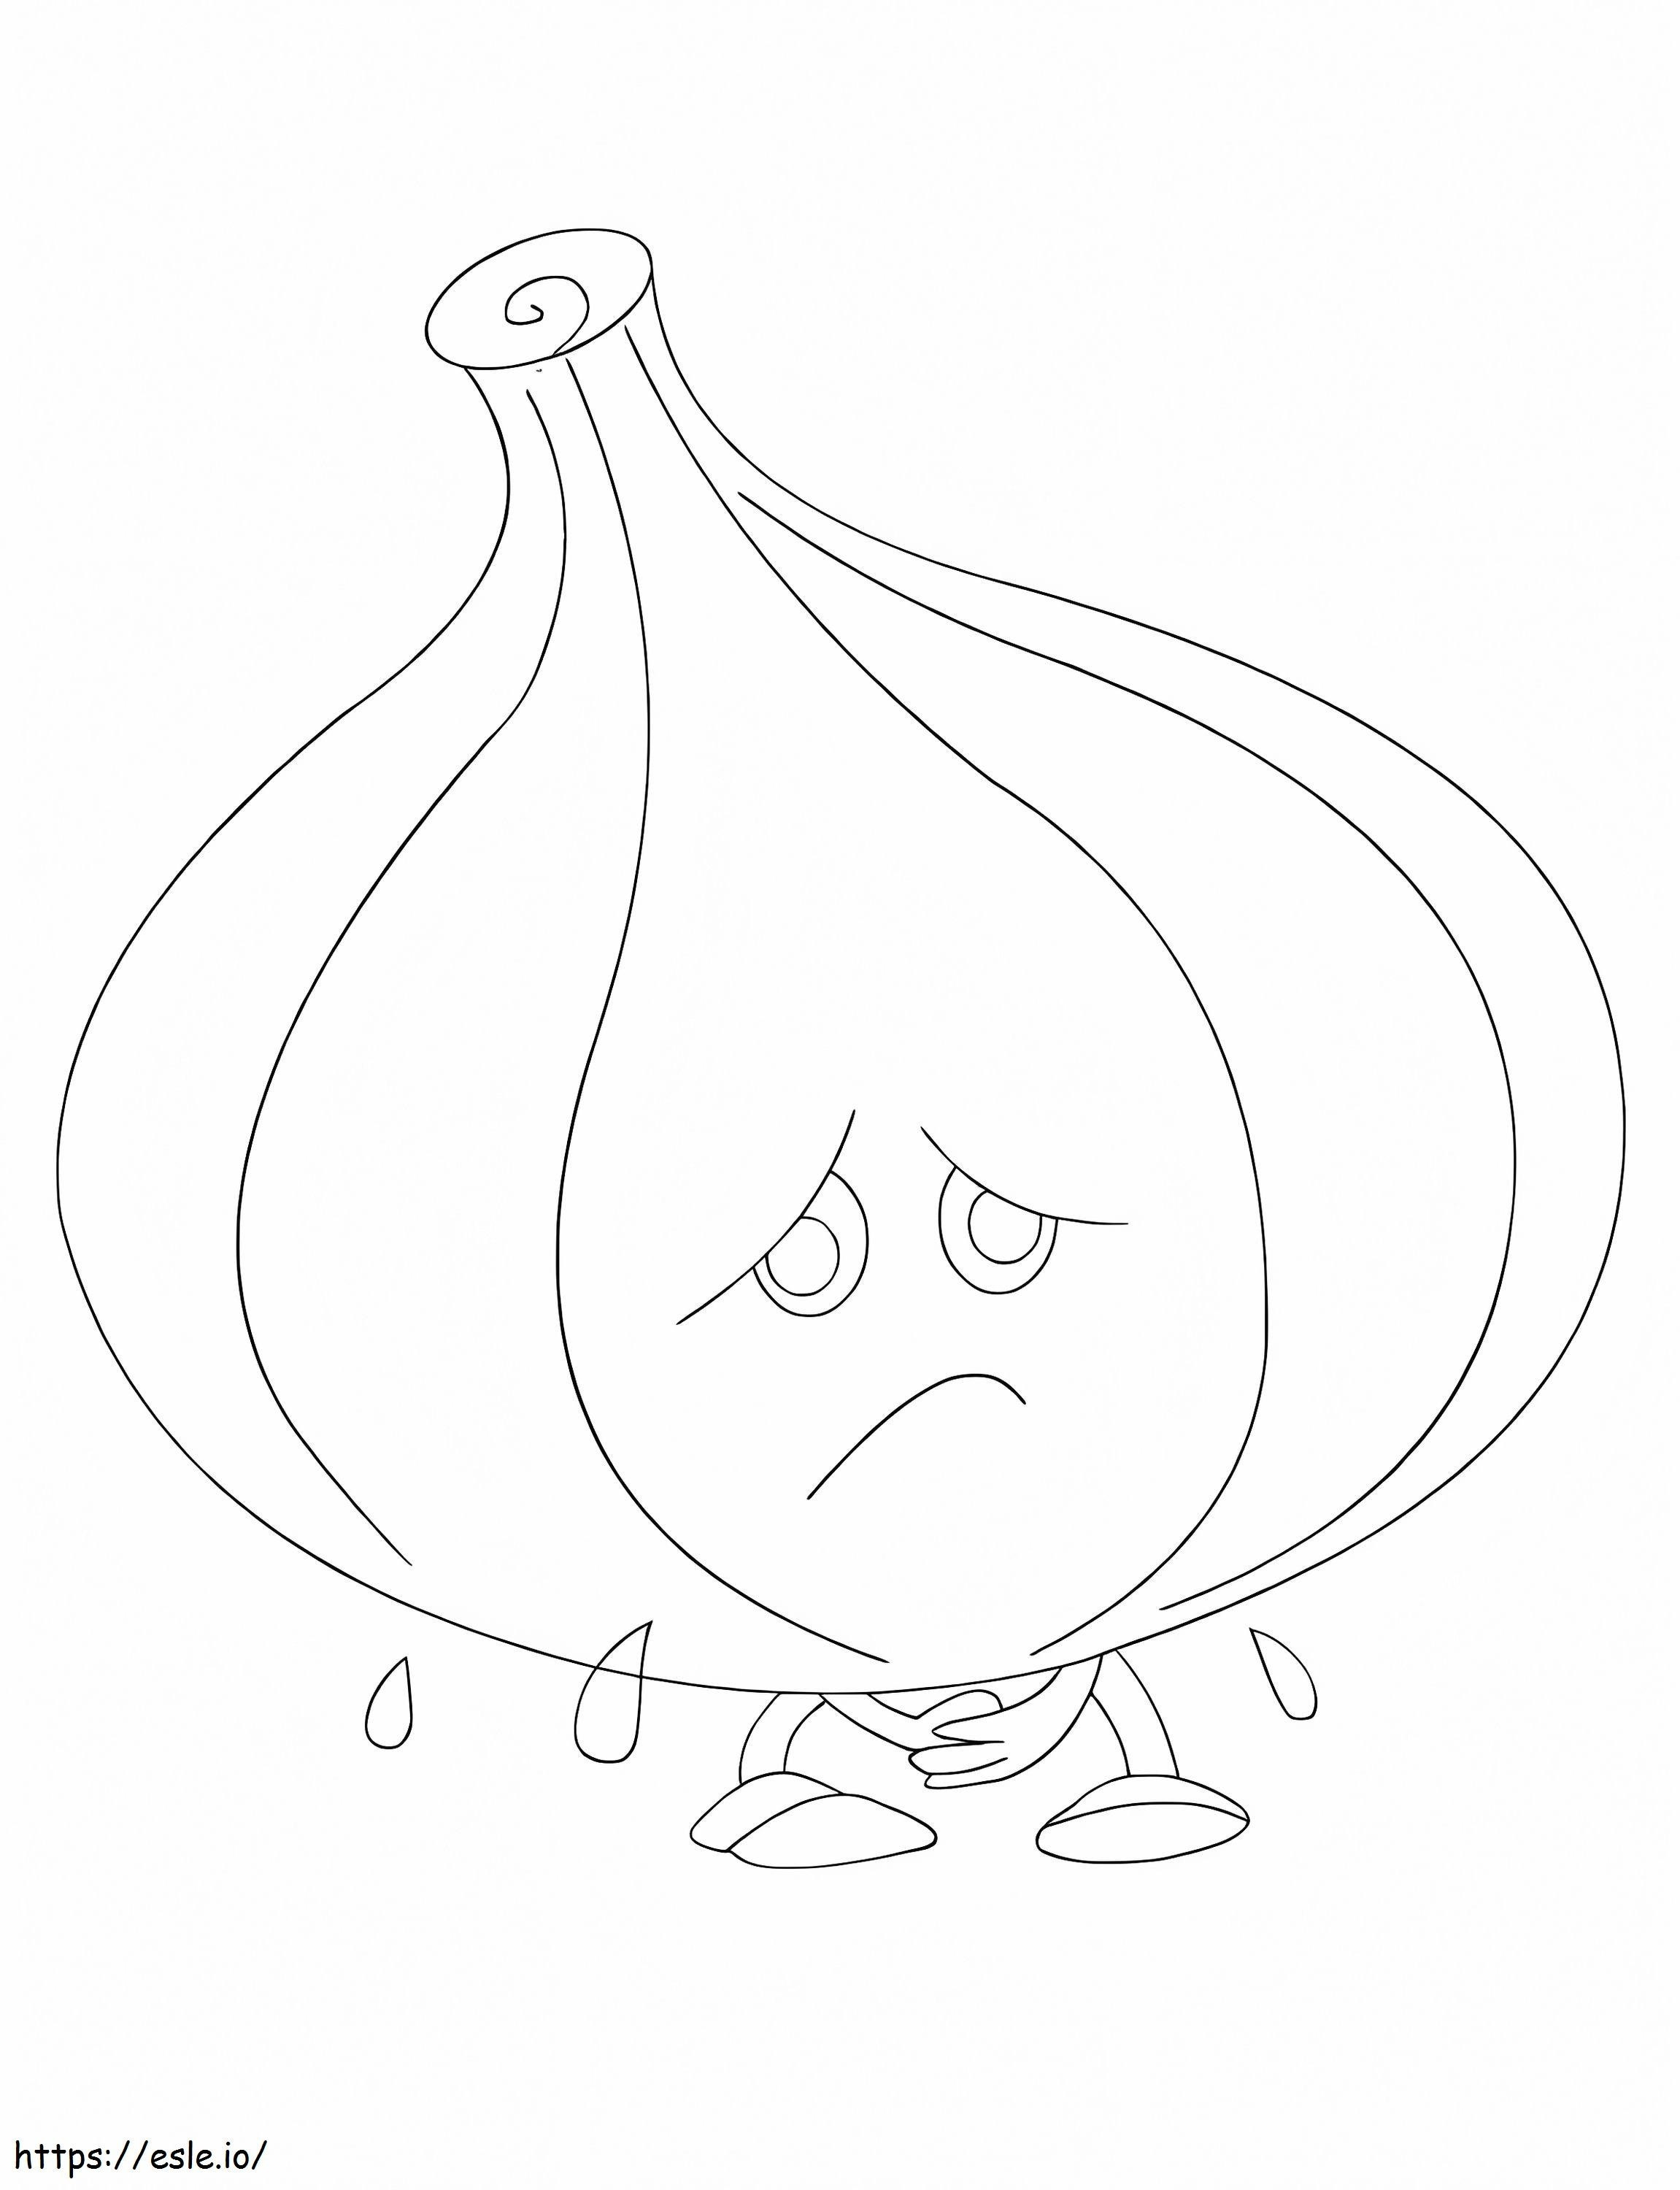 Crying Onion coloring page